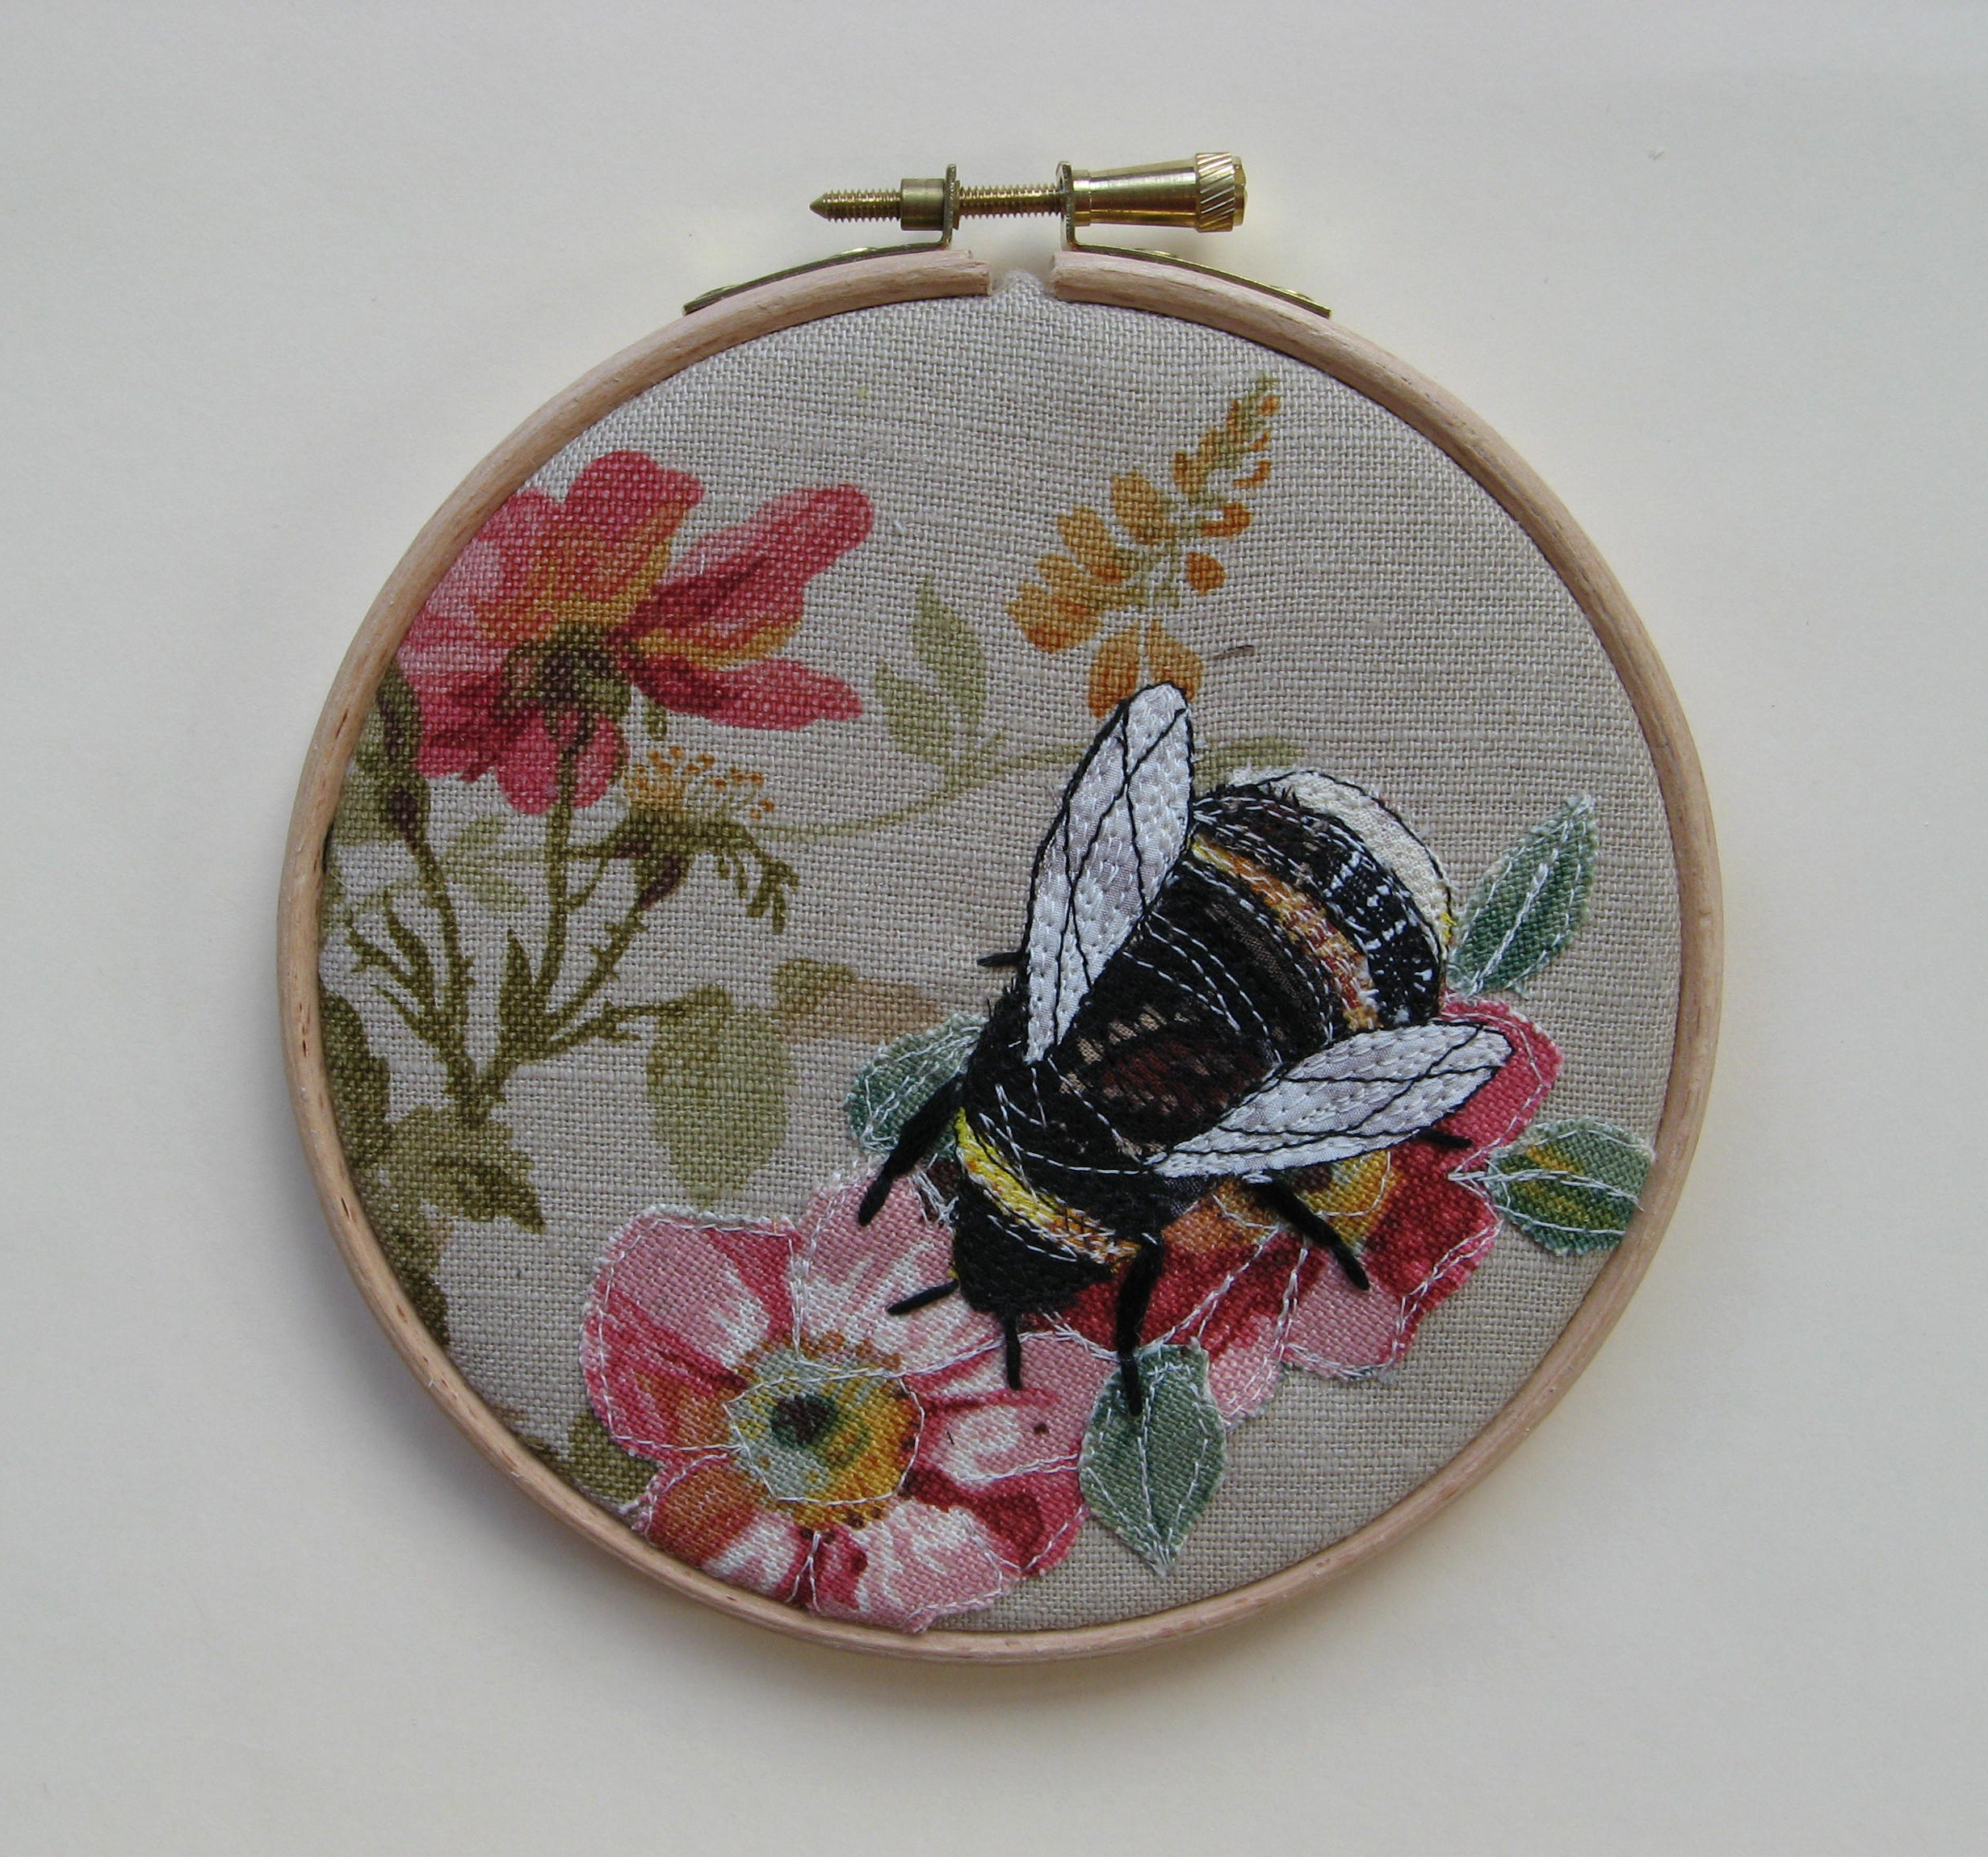 Bumble Bee Embroidery Pattern Bees Agnesandcora